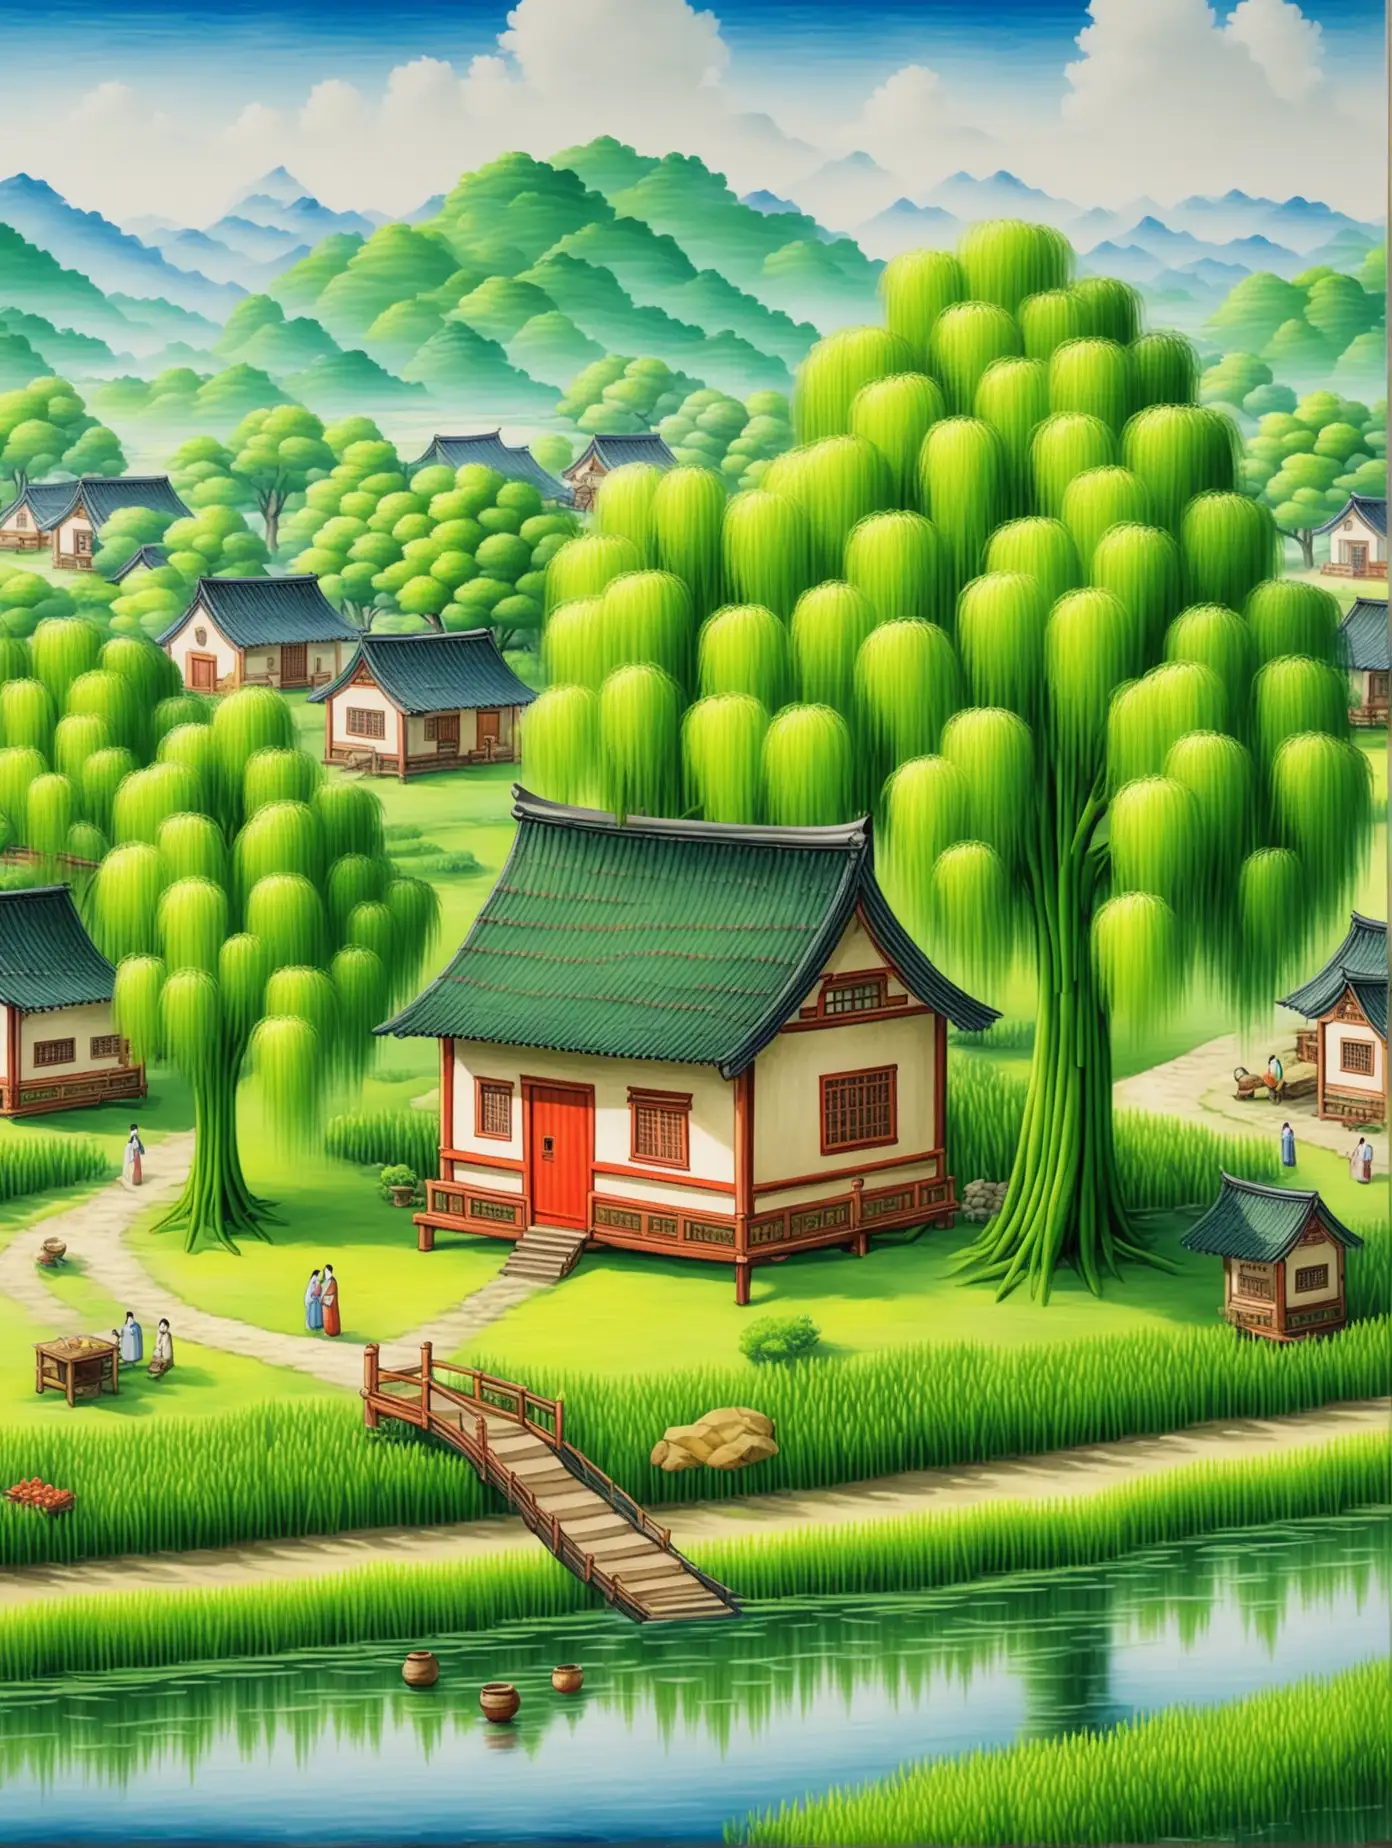 Idyllic Scene with Willow Trees and Folk Art Style House